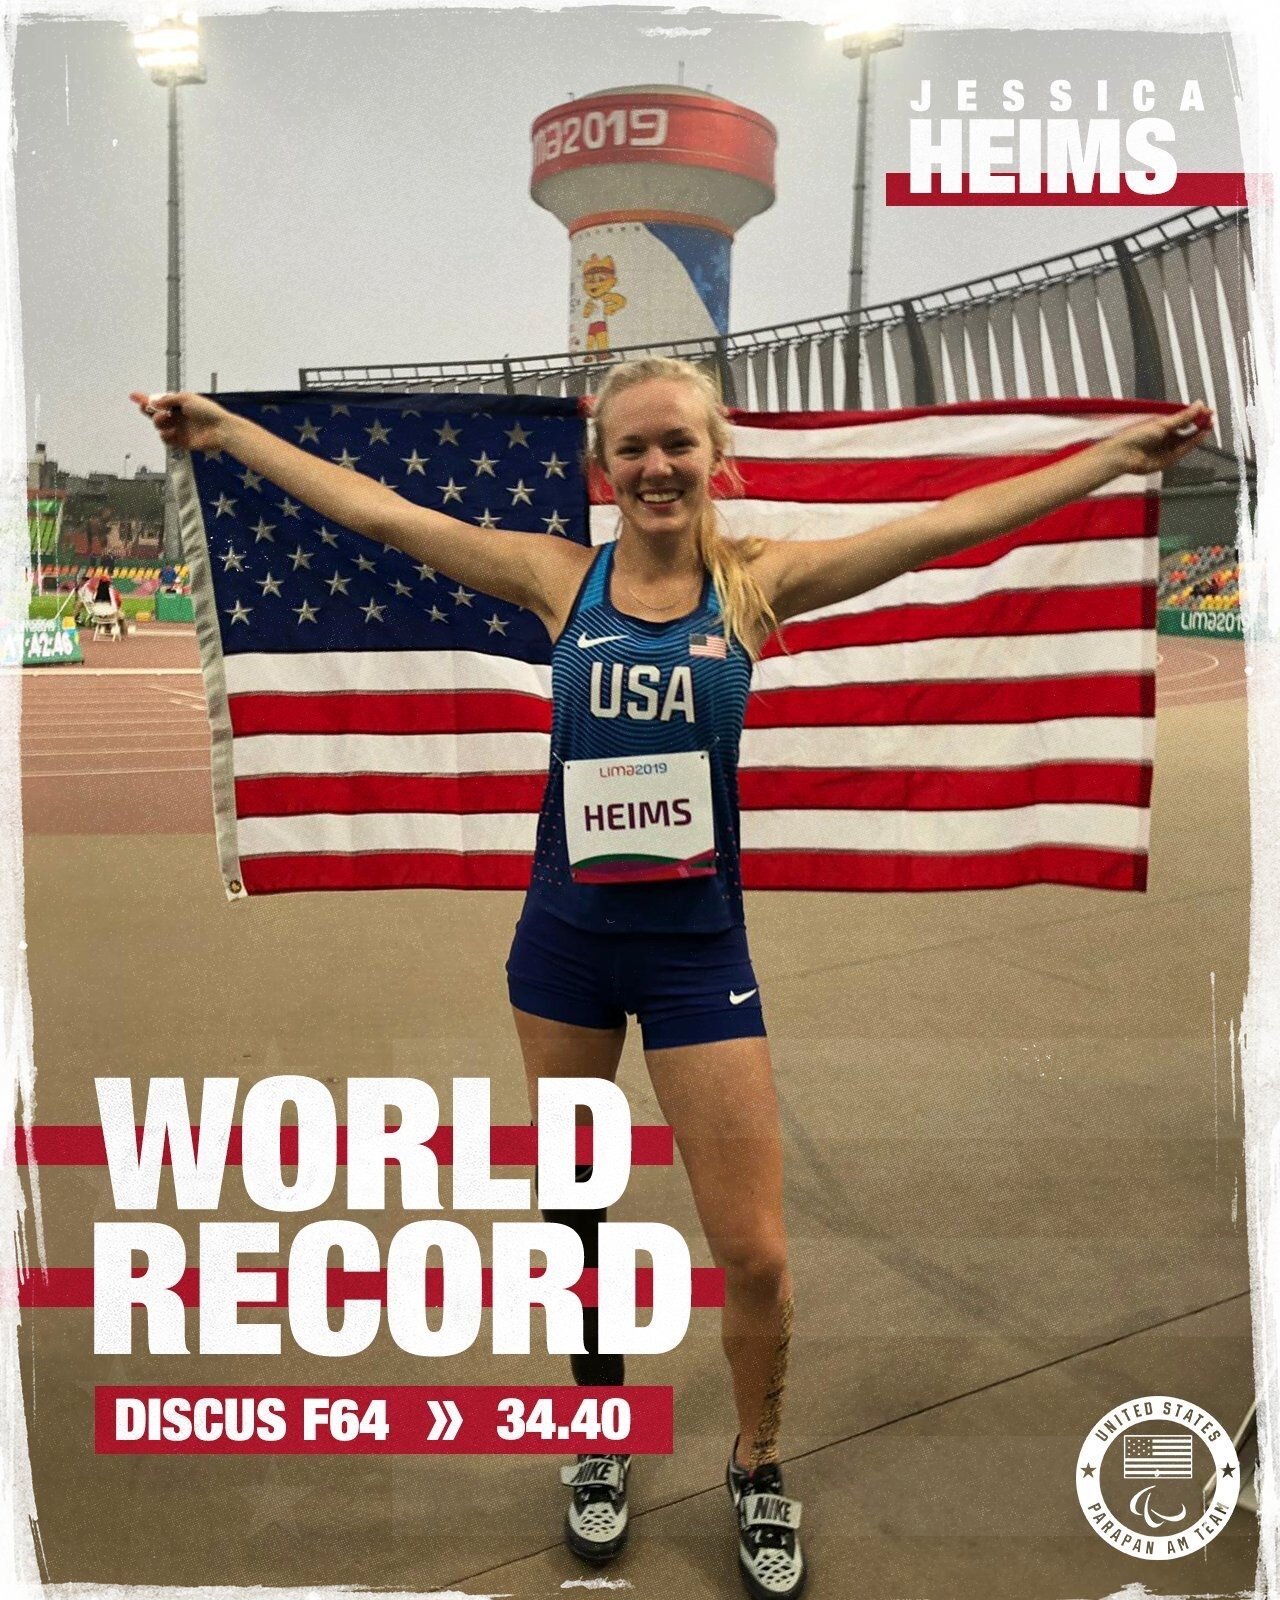 Jessica holding the USA flag and smiling. Large and bold text over the photo says "WORLD RECORD DISCUS F64, 34.40."